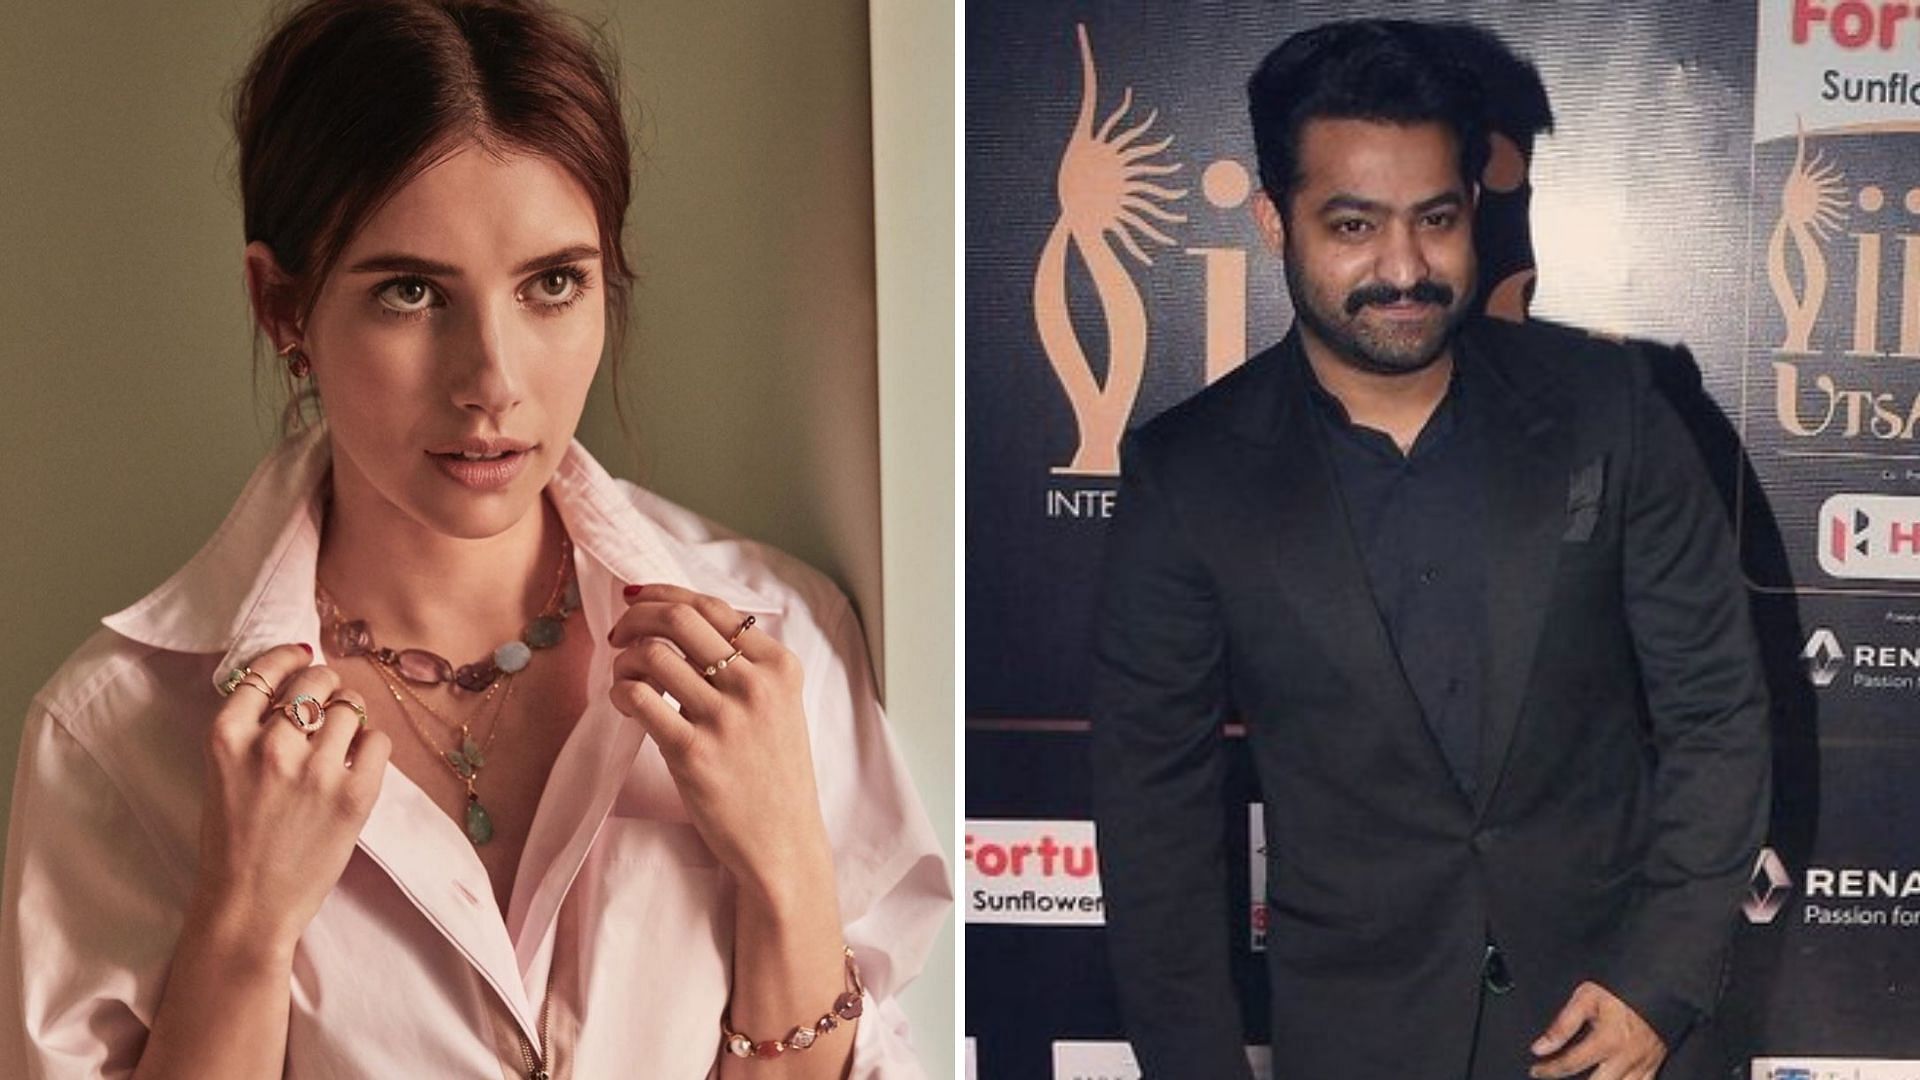 Emma Roberts will reportedly play Jr NTR’s love interest in SS Rajamouli’s <i>RRR.</i>